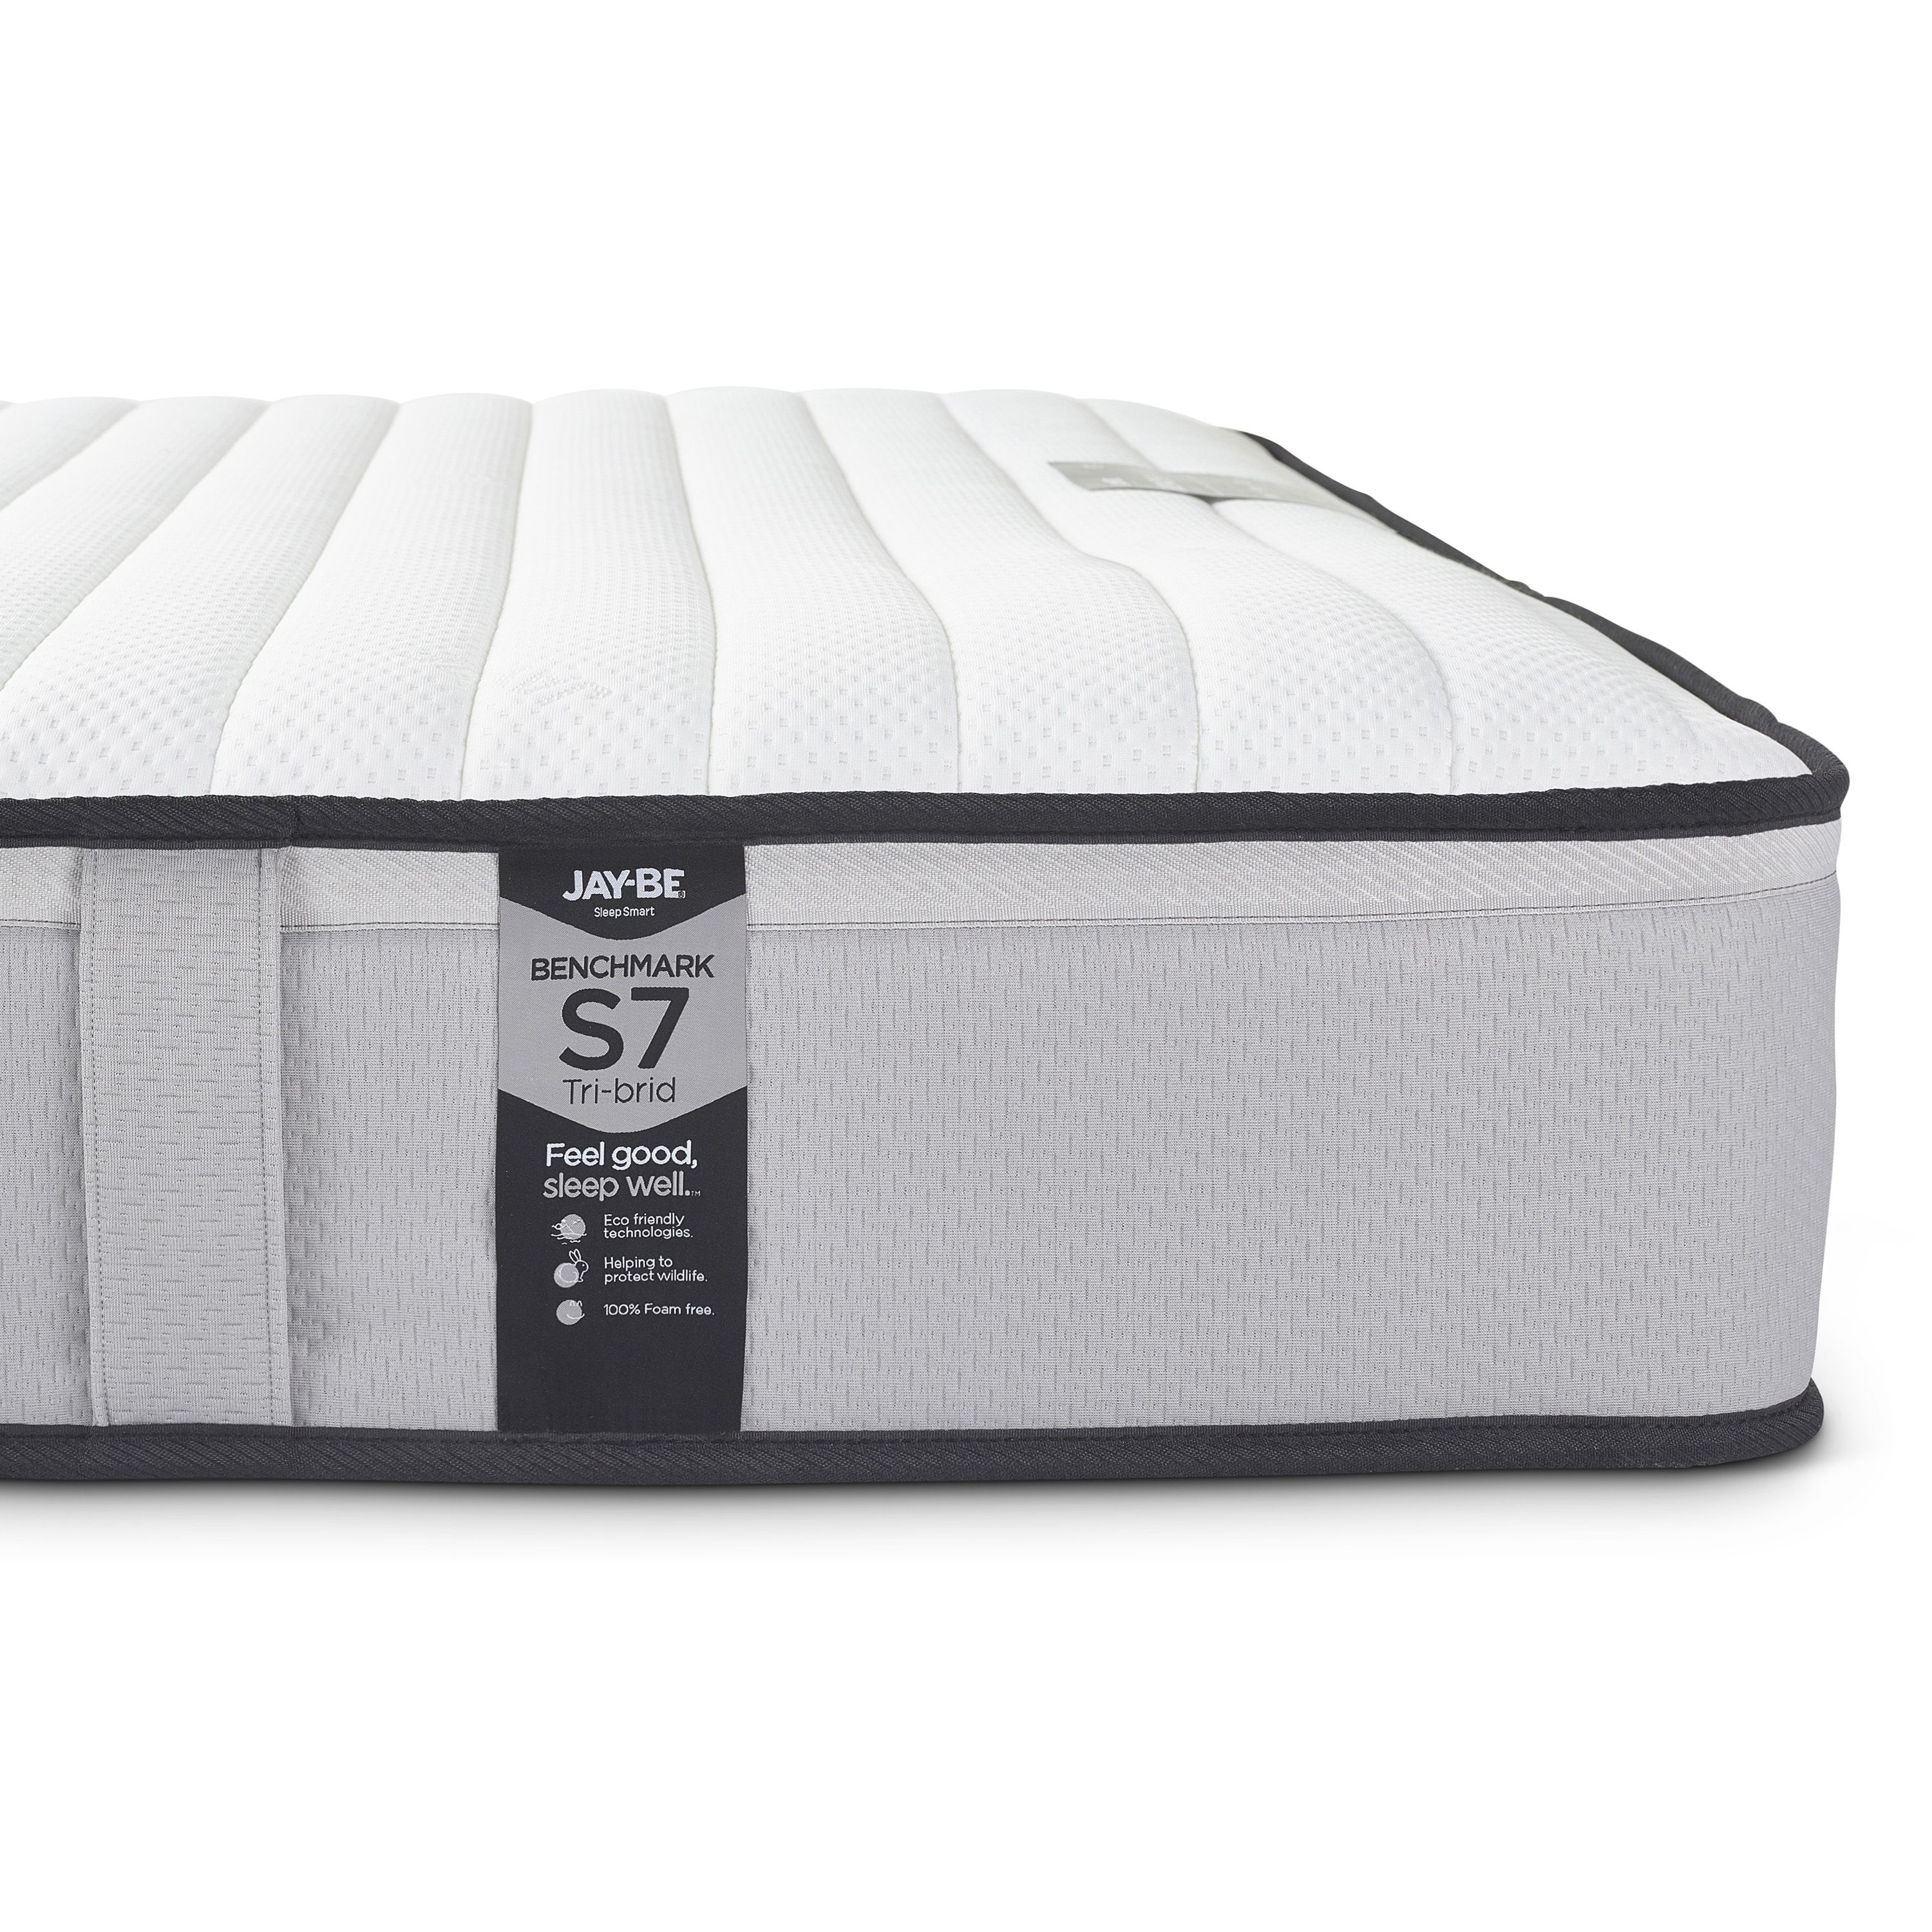 Jay-Be Benchmark Open coil Small double Mattress